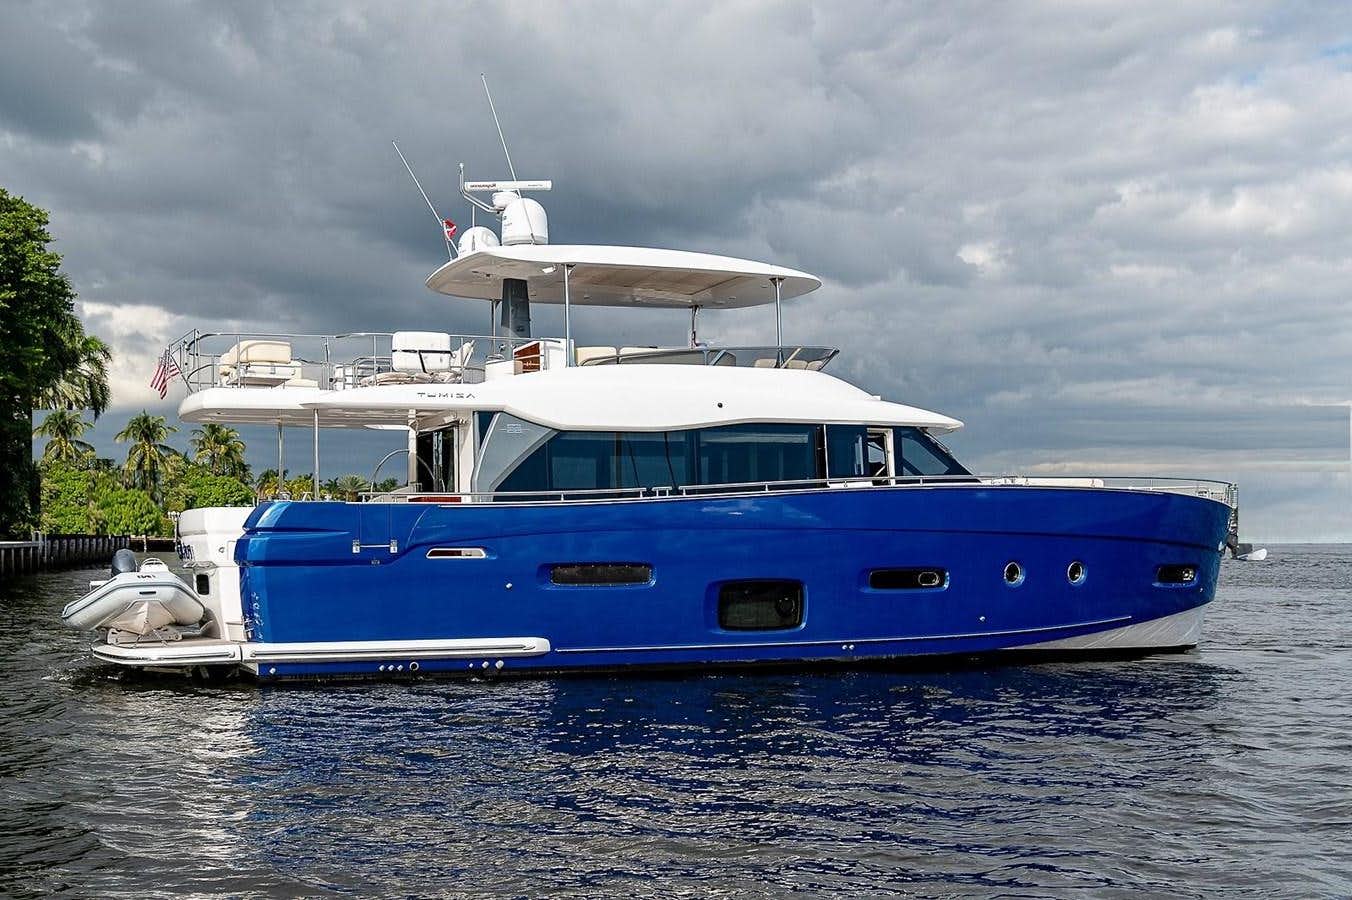 Watch Video for PURA VIDA Yacht for Sale